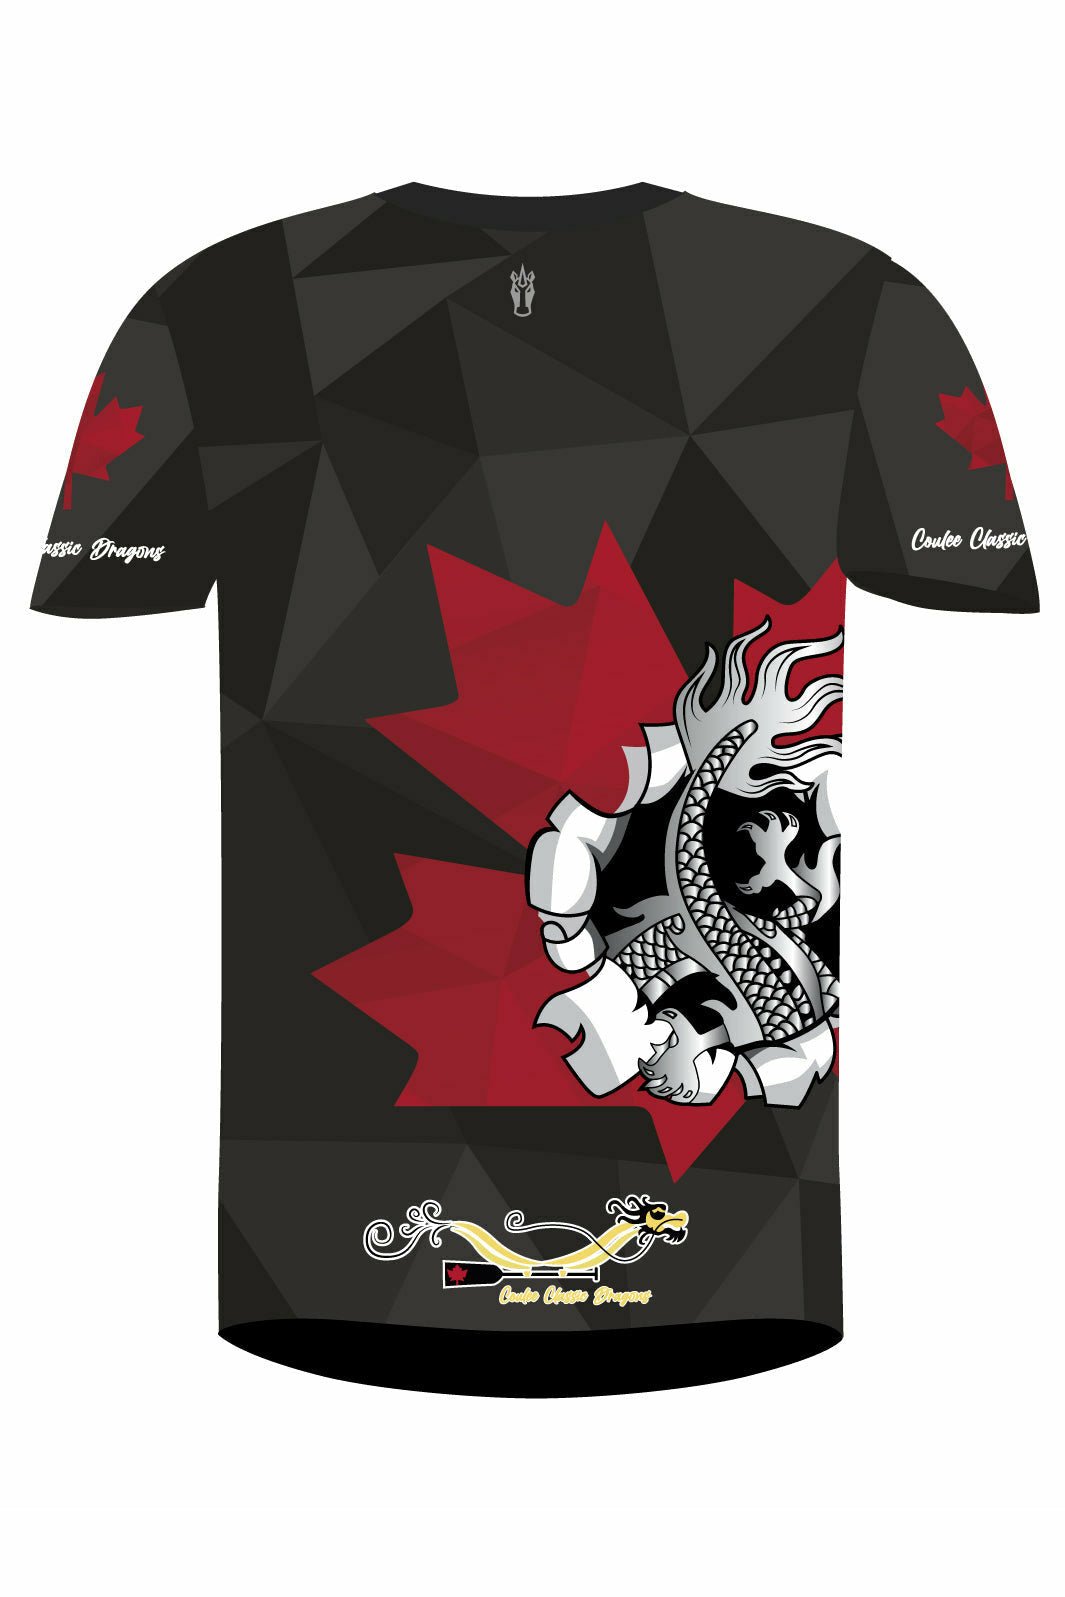 Coulee Classic Dragons Unisex h2O Team Jersey Short Sleeve - Oddball Workshop